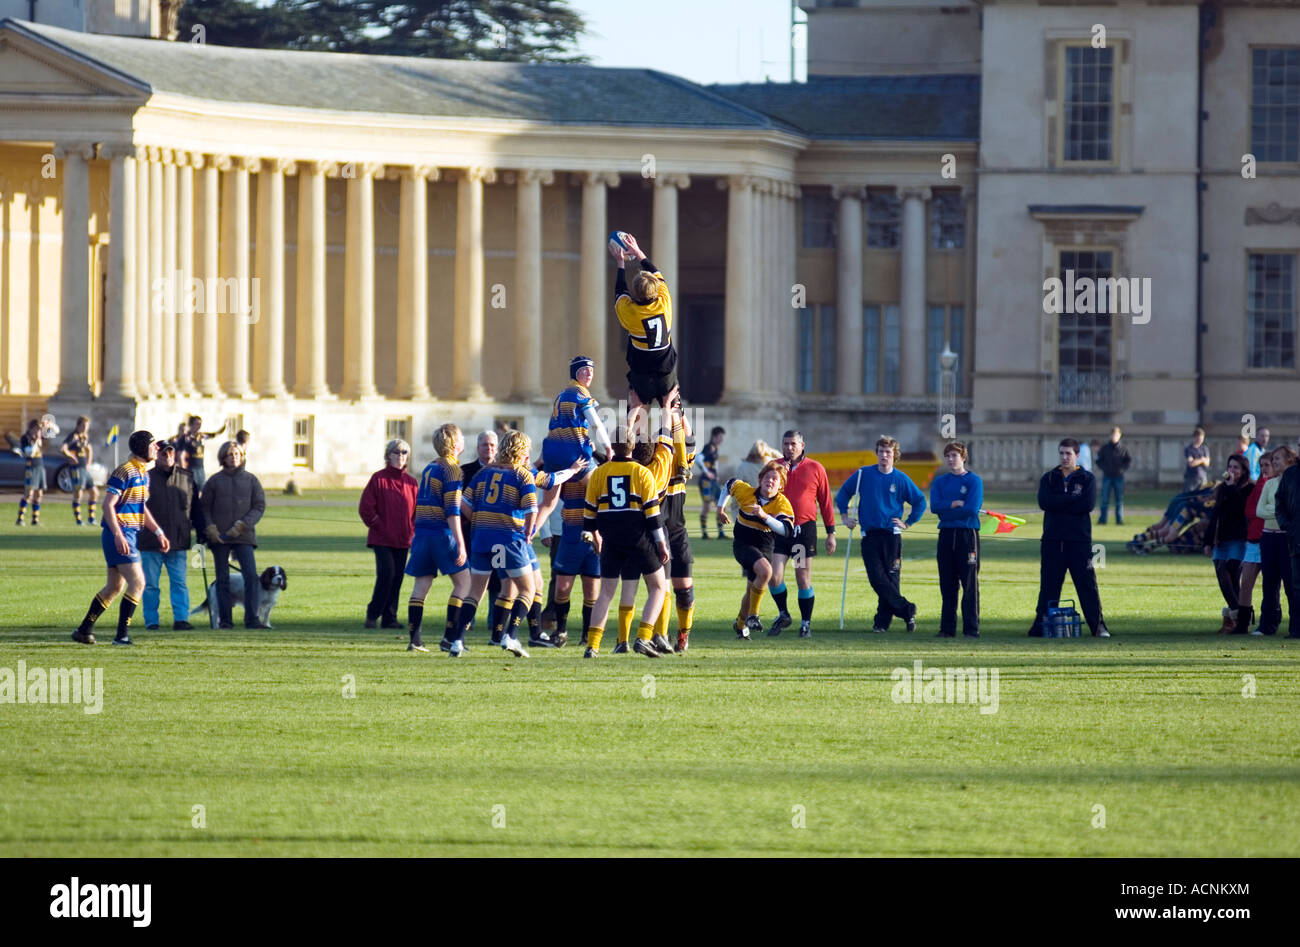 Playing rugby at Stowe Public School Buckingham MK18 5EH England Stowe Public School Stock Photo